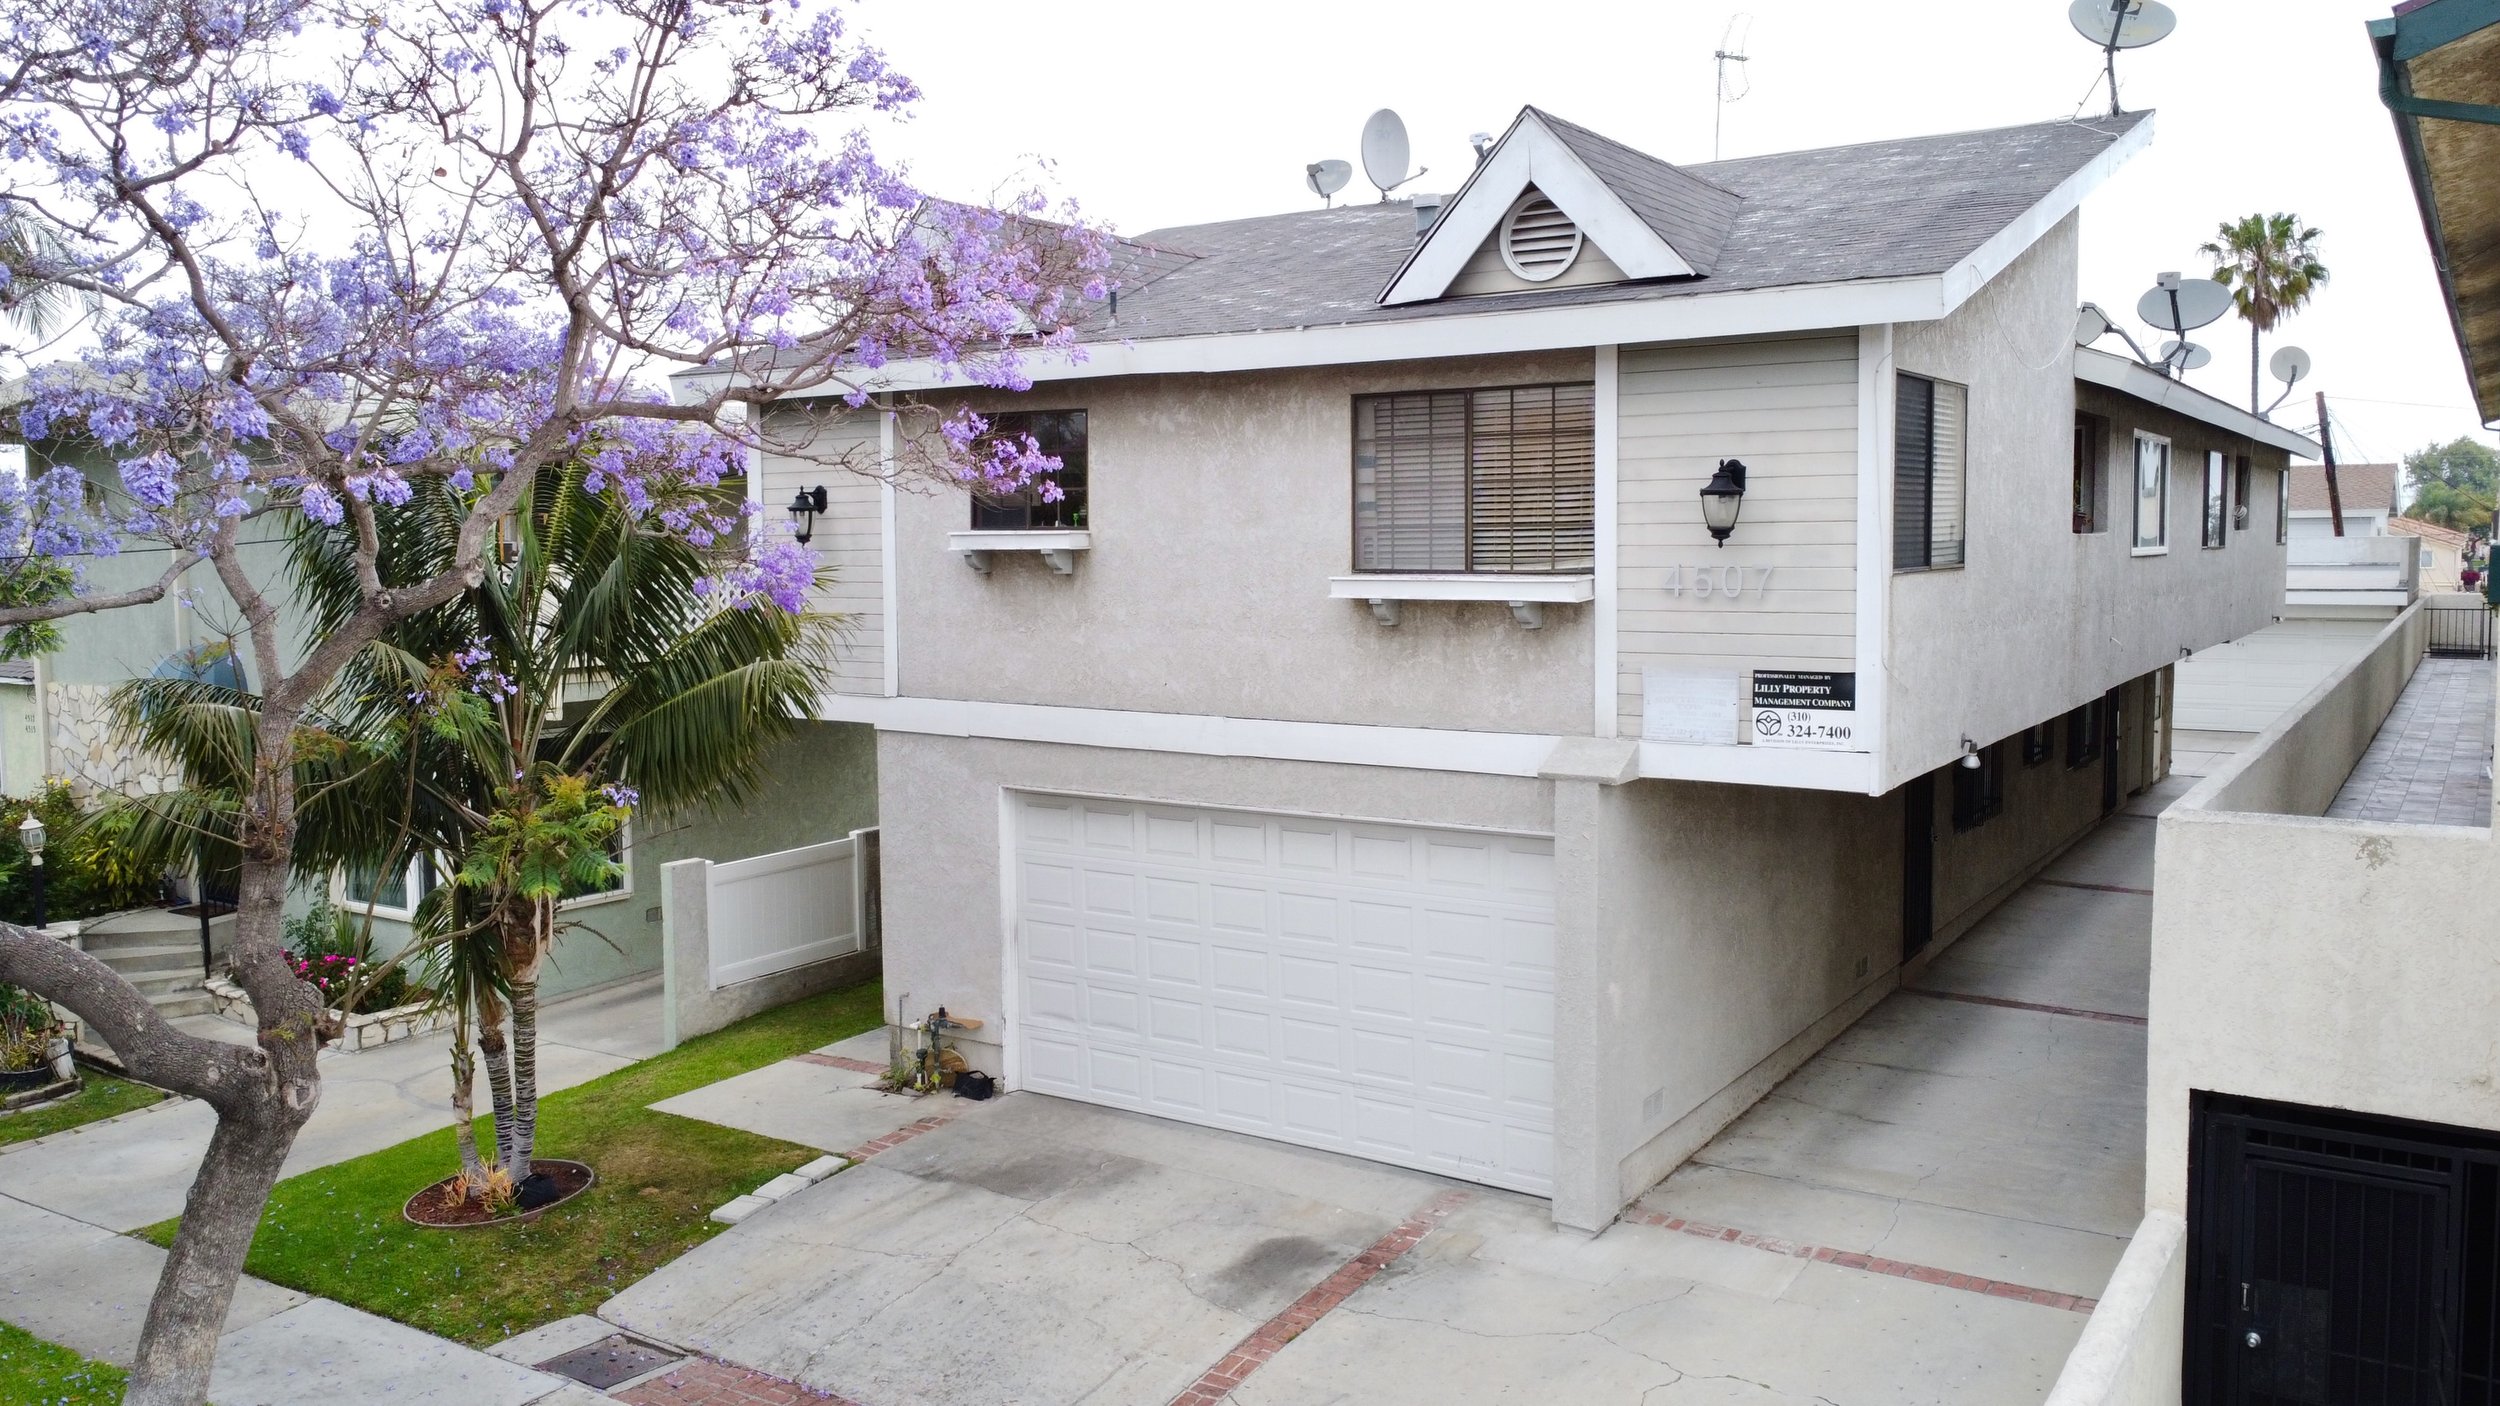 House with white garage and purple-flowered tree.